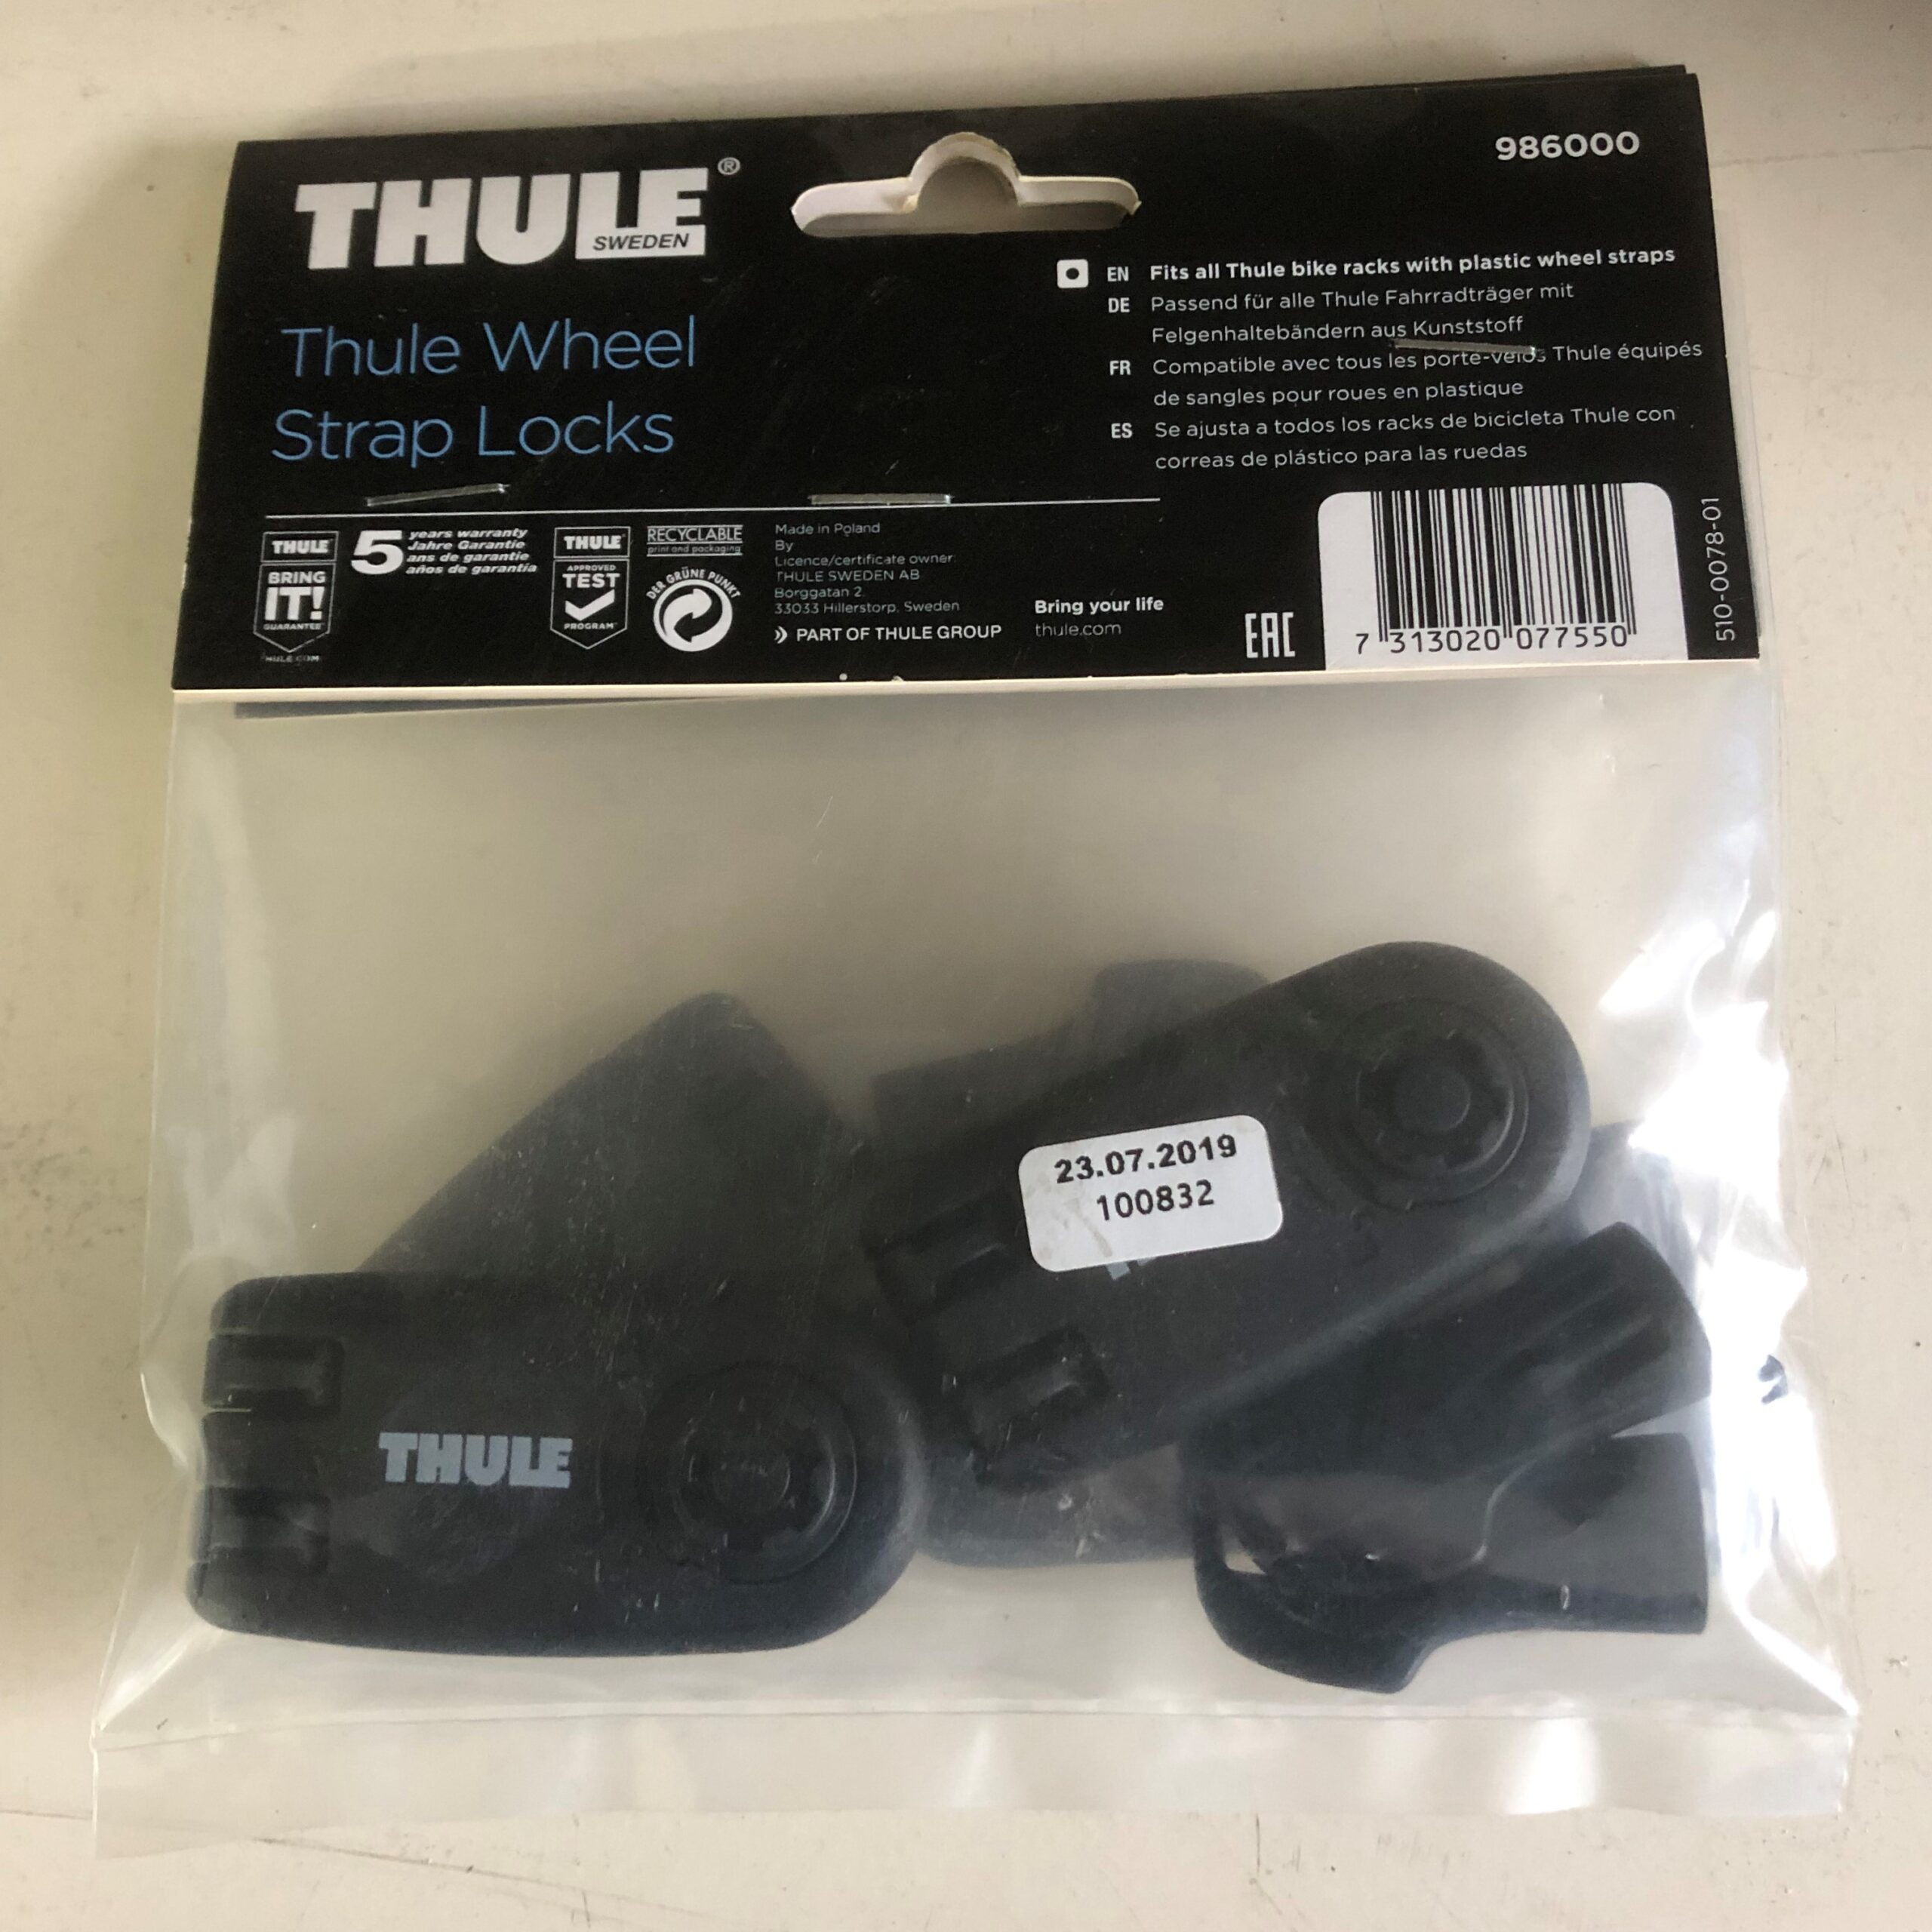 THULE WHEEL STRAP LOCKS FOR CYCLE CARRIER FOR ALL THULE PLASTIC WHEEL STRAPS 986 